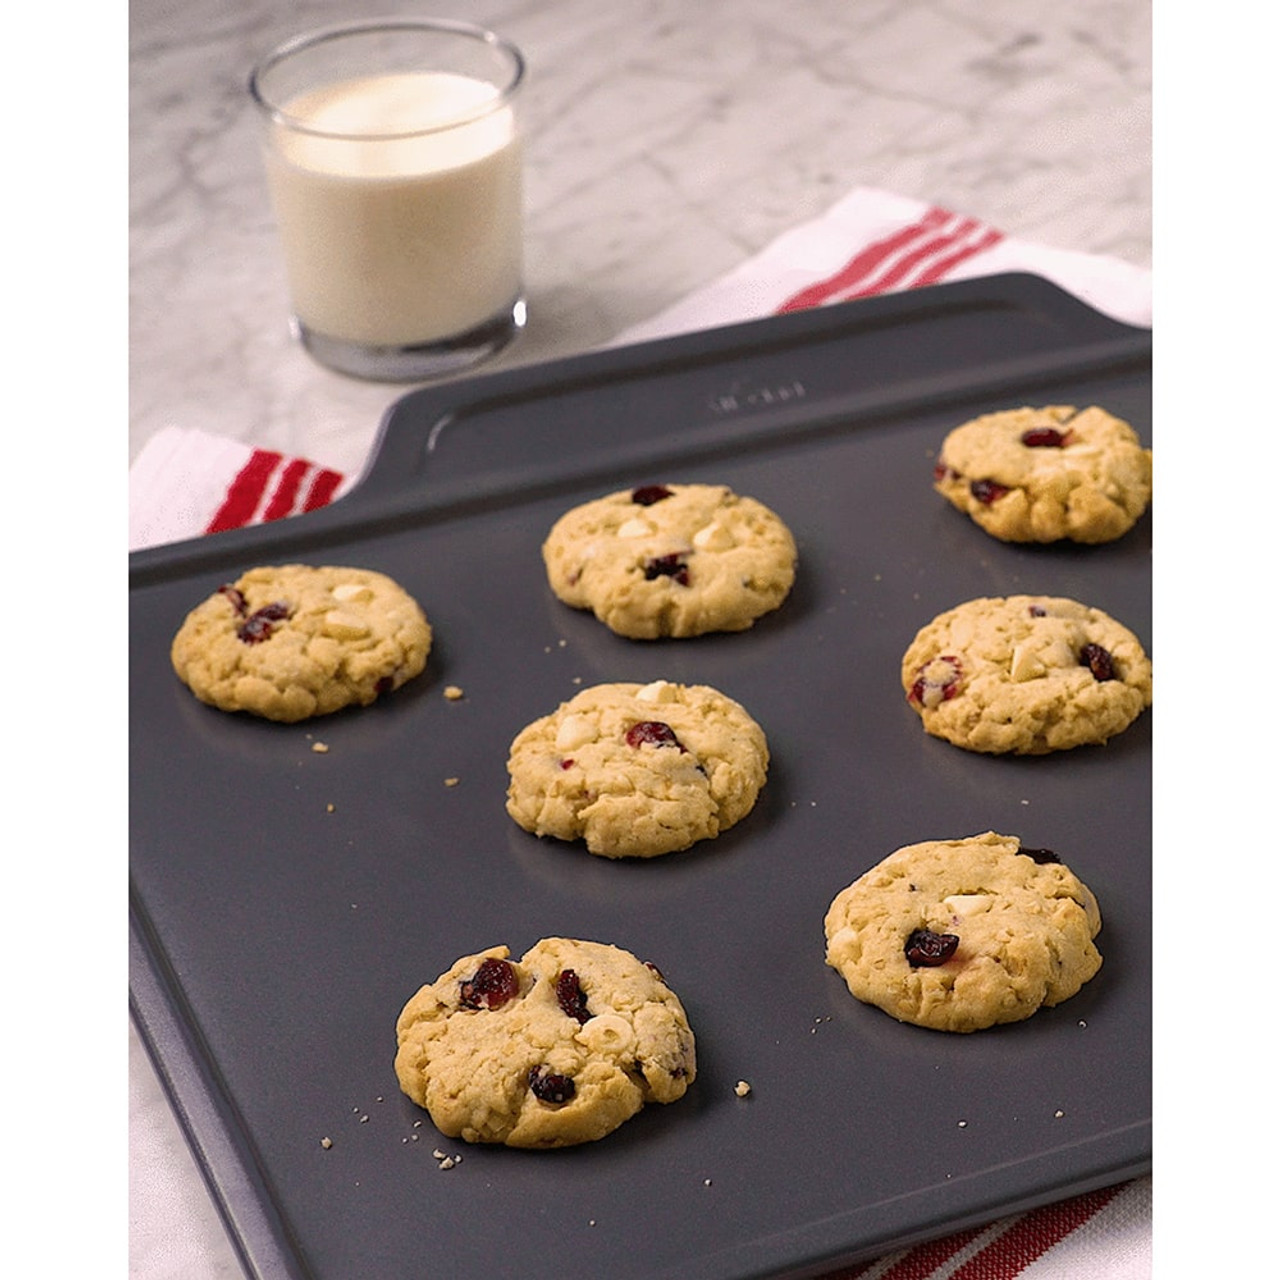 https://cdn11.bigcommerce.com/s-hccytny0od/images/stencil/1280x1280/products/3281/11744/all-clad-pro-release-cookie-sheet-2__29318.1589500652.jpg?c=2?imbypass=on